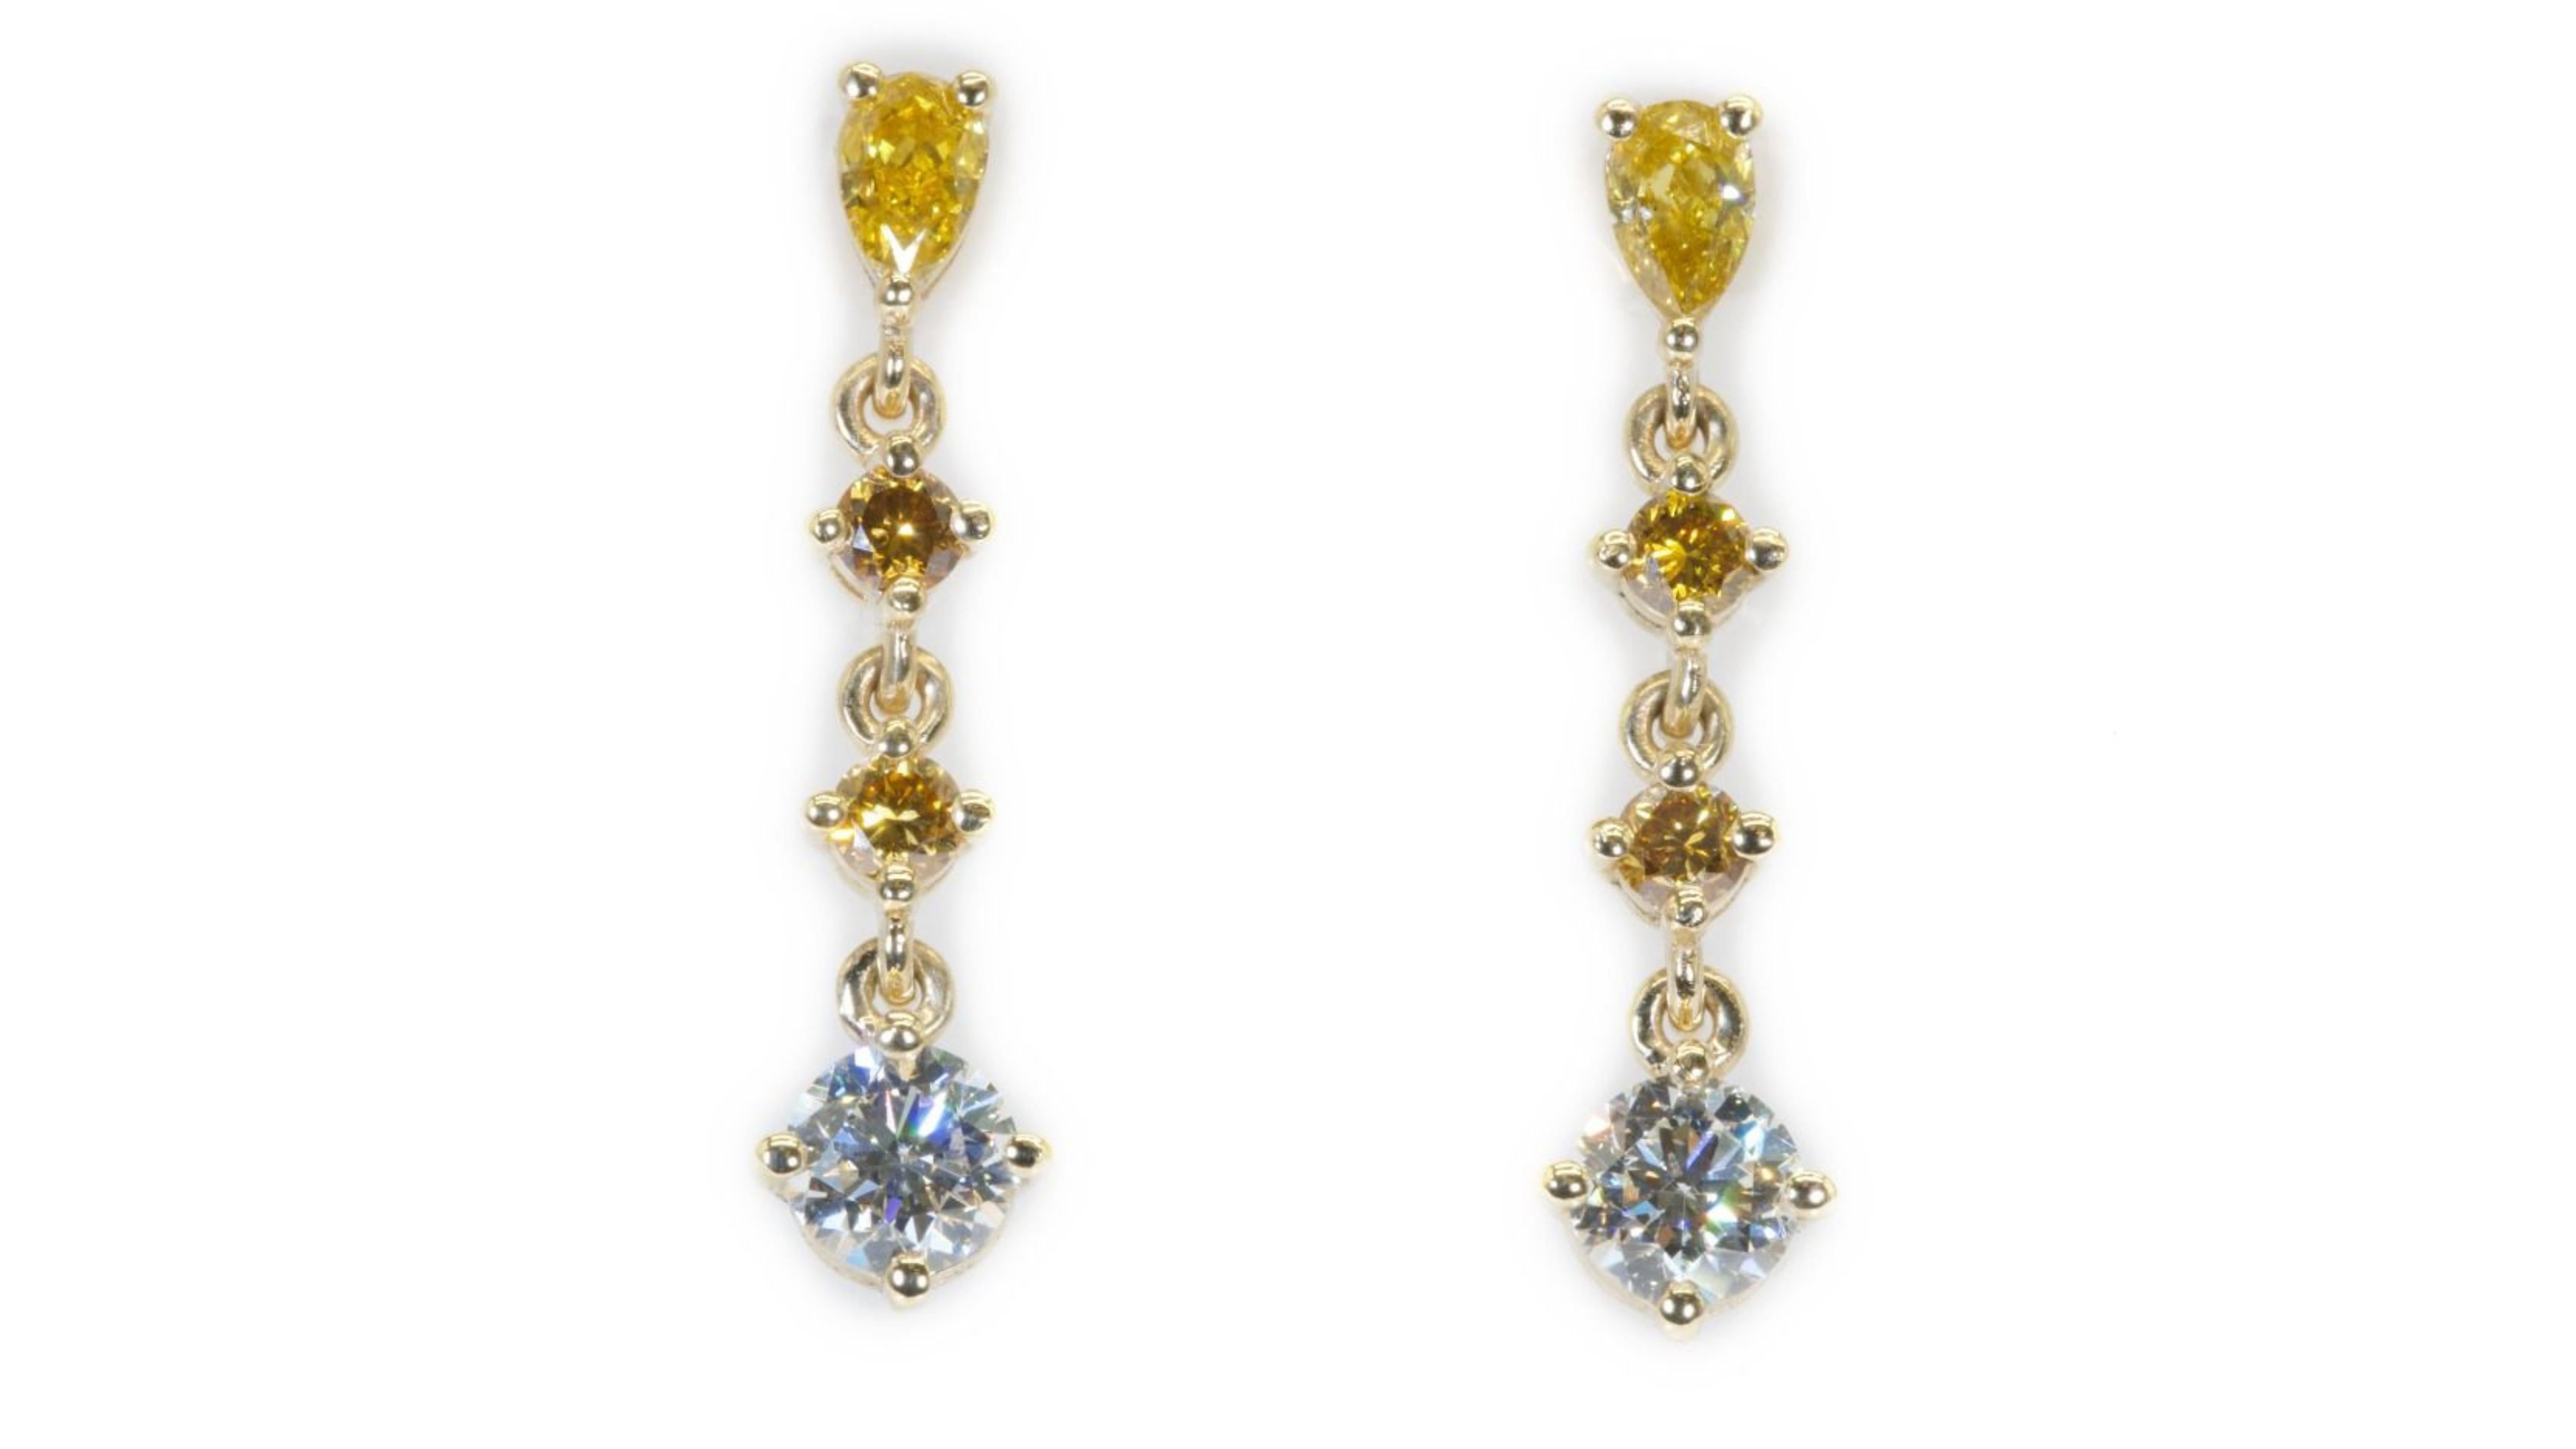 Glamorous 1.56ct. Mix Shapes Dangling Diamond Earrings  For Sale 4